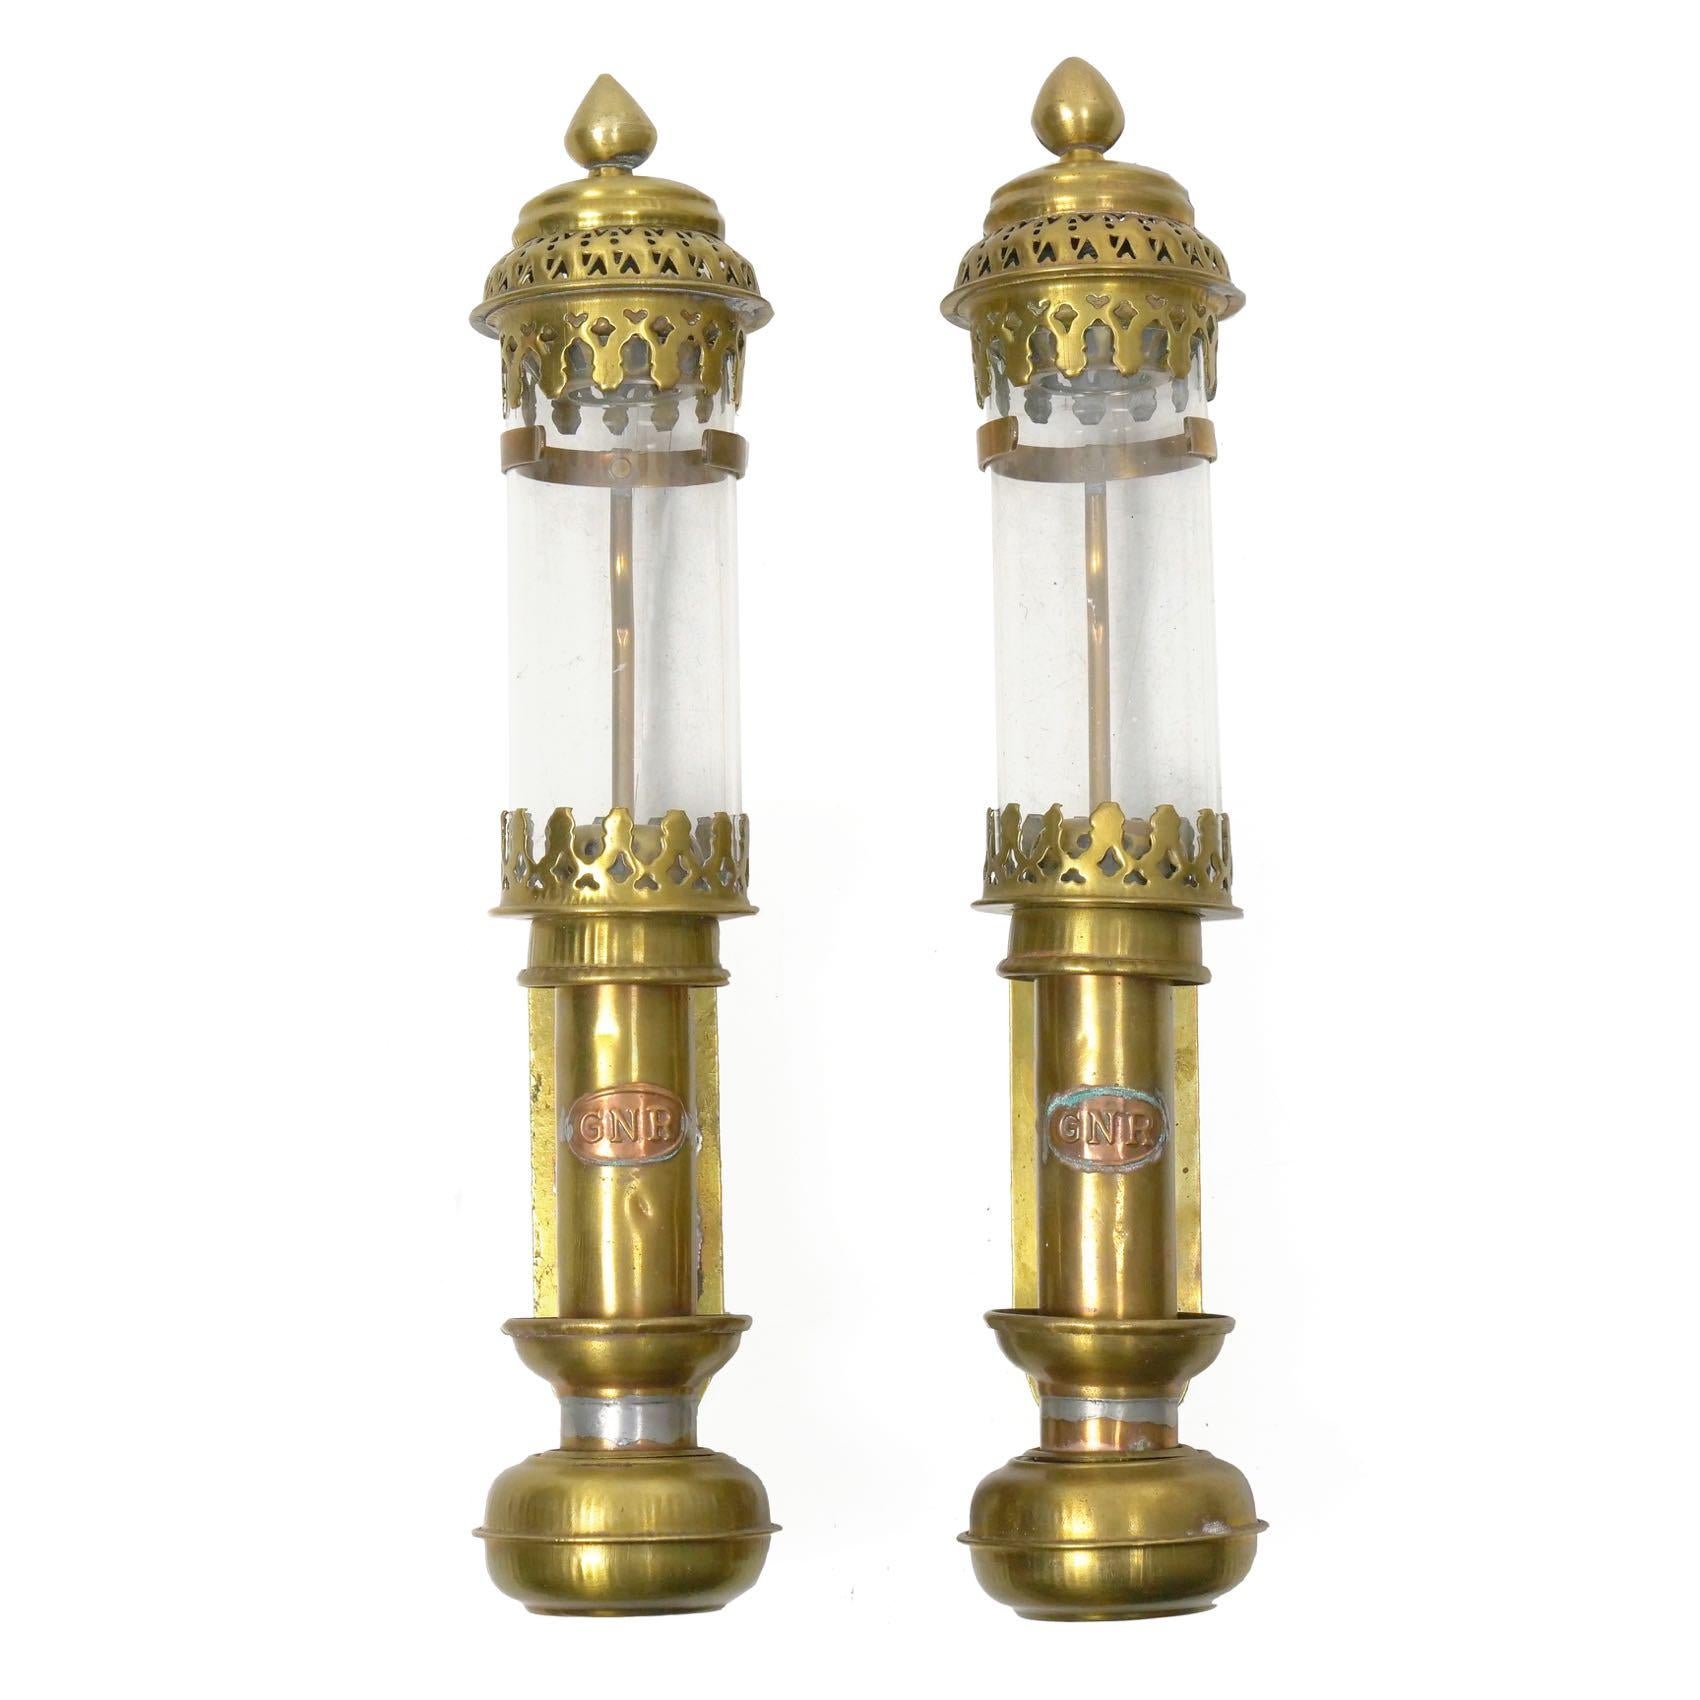 This is an attractive 20th century pair of reproduction carriage lamps bearing a copper plaque stamped GNR, each being produced in exact replication of the Great Northern Railway and Great Western Railway carriage lamps. They are such an interesting